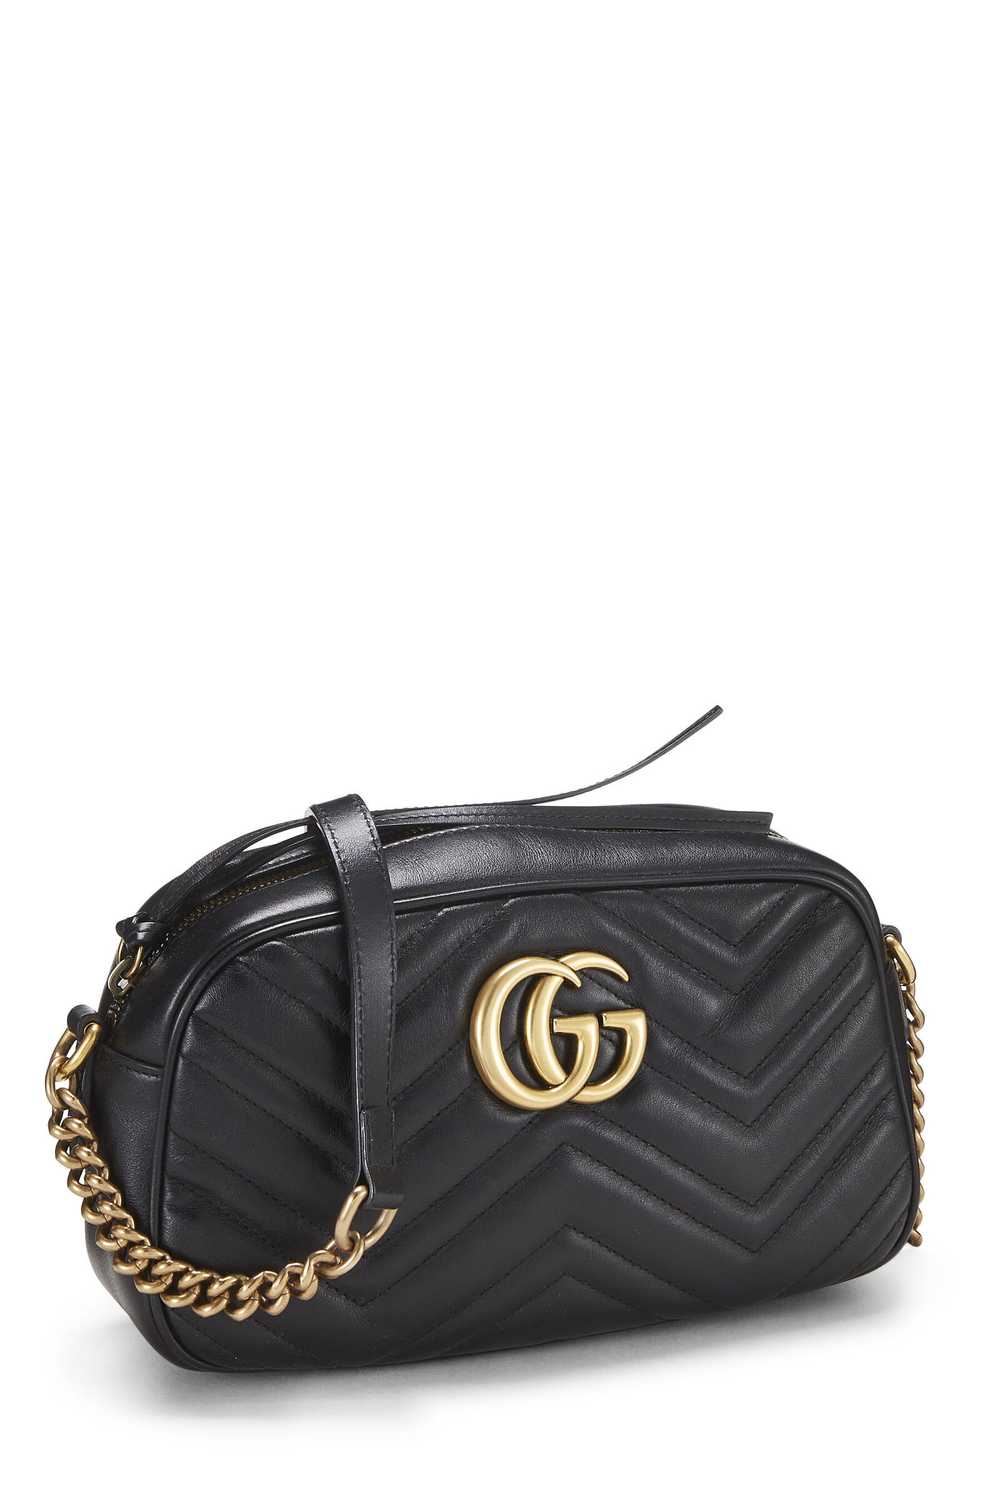 Black Leather GG Marmont Crossbody Small - image 2